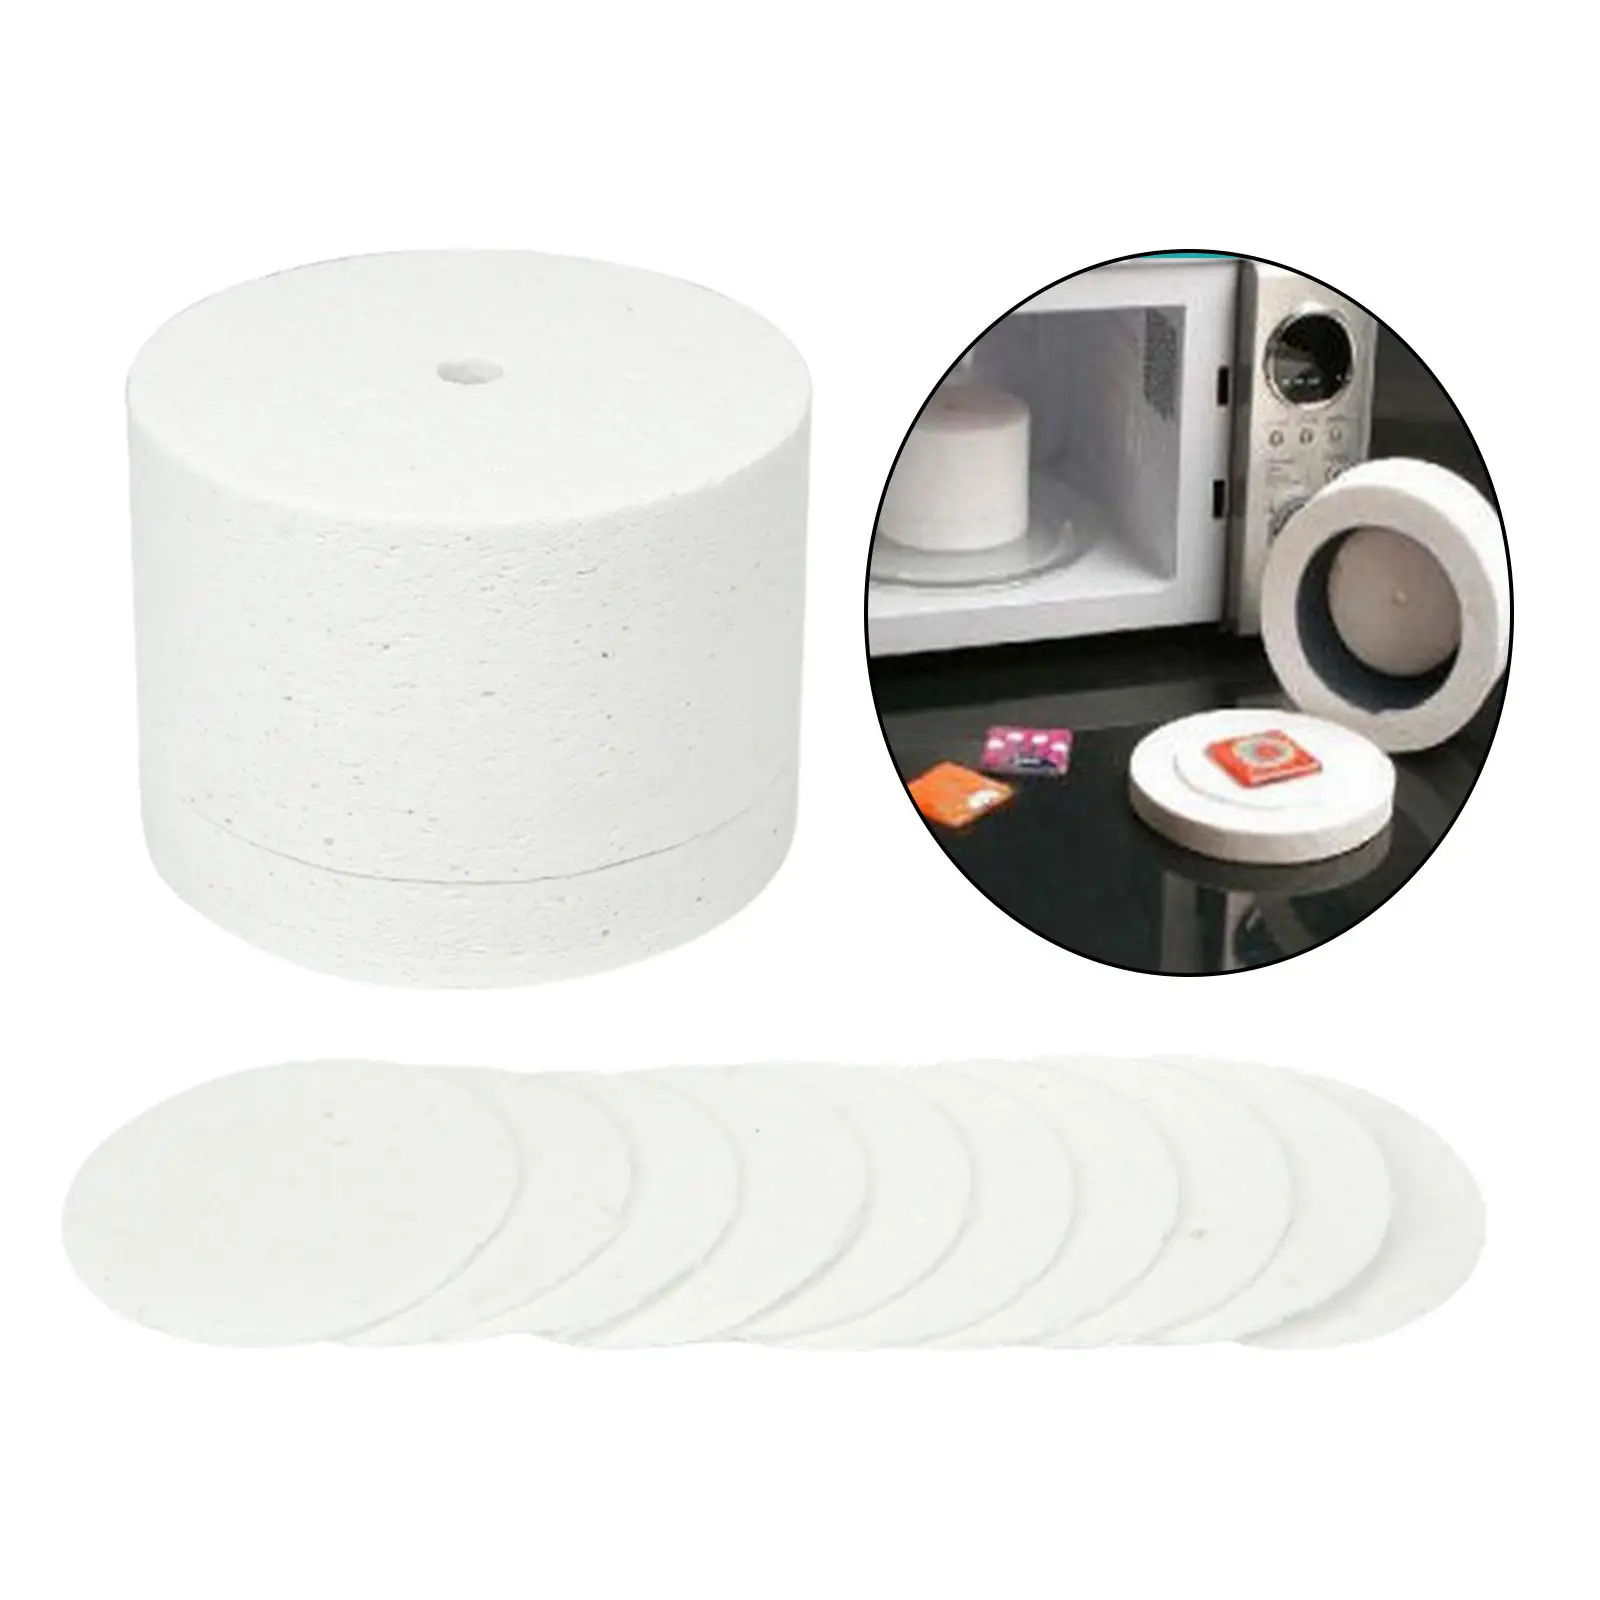 Ceramic Microwave Kiln Small with Kiln Paper Professional for Jewelry Tool Melting Stained Glass Fusing Craft Tools Beginner